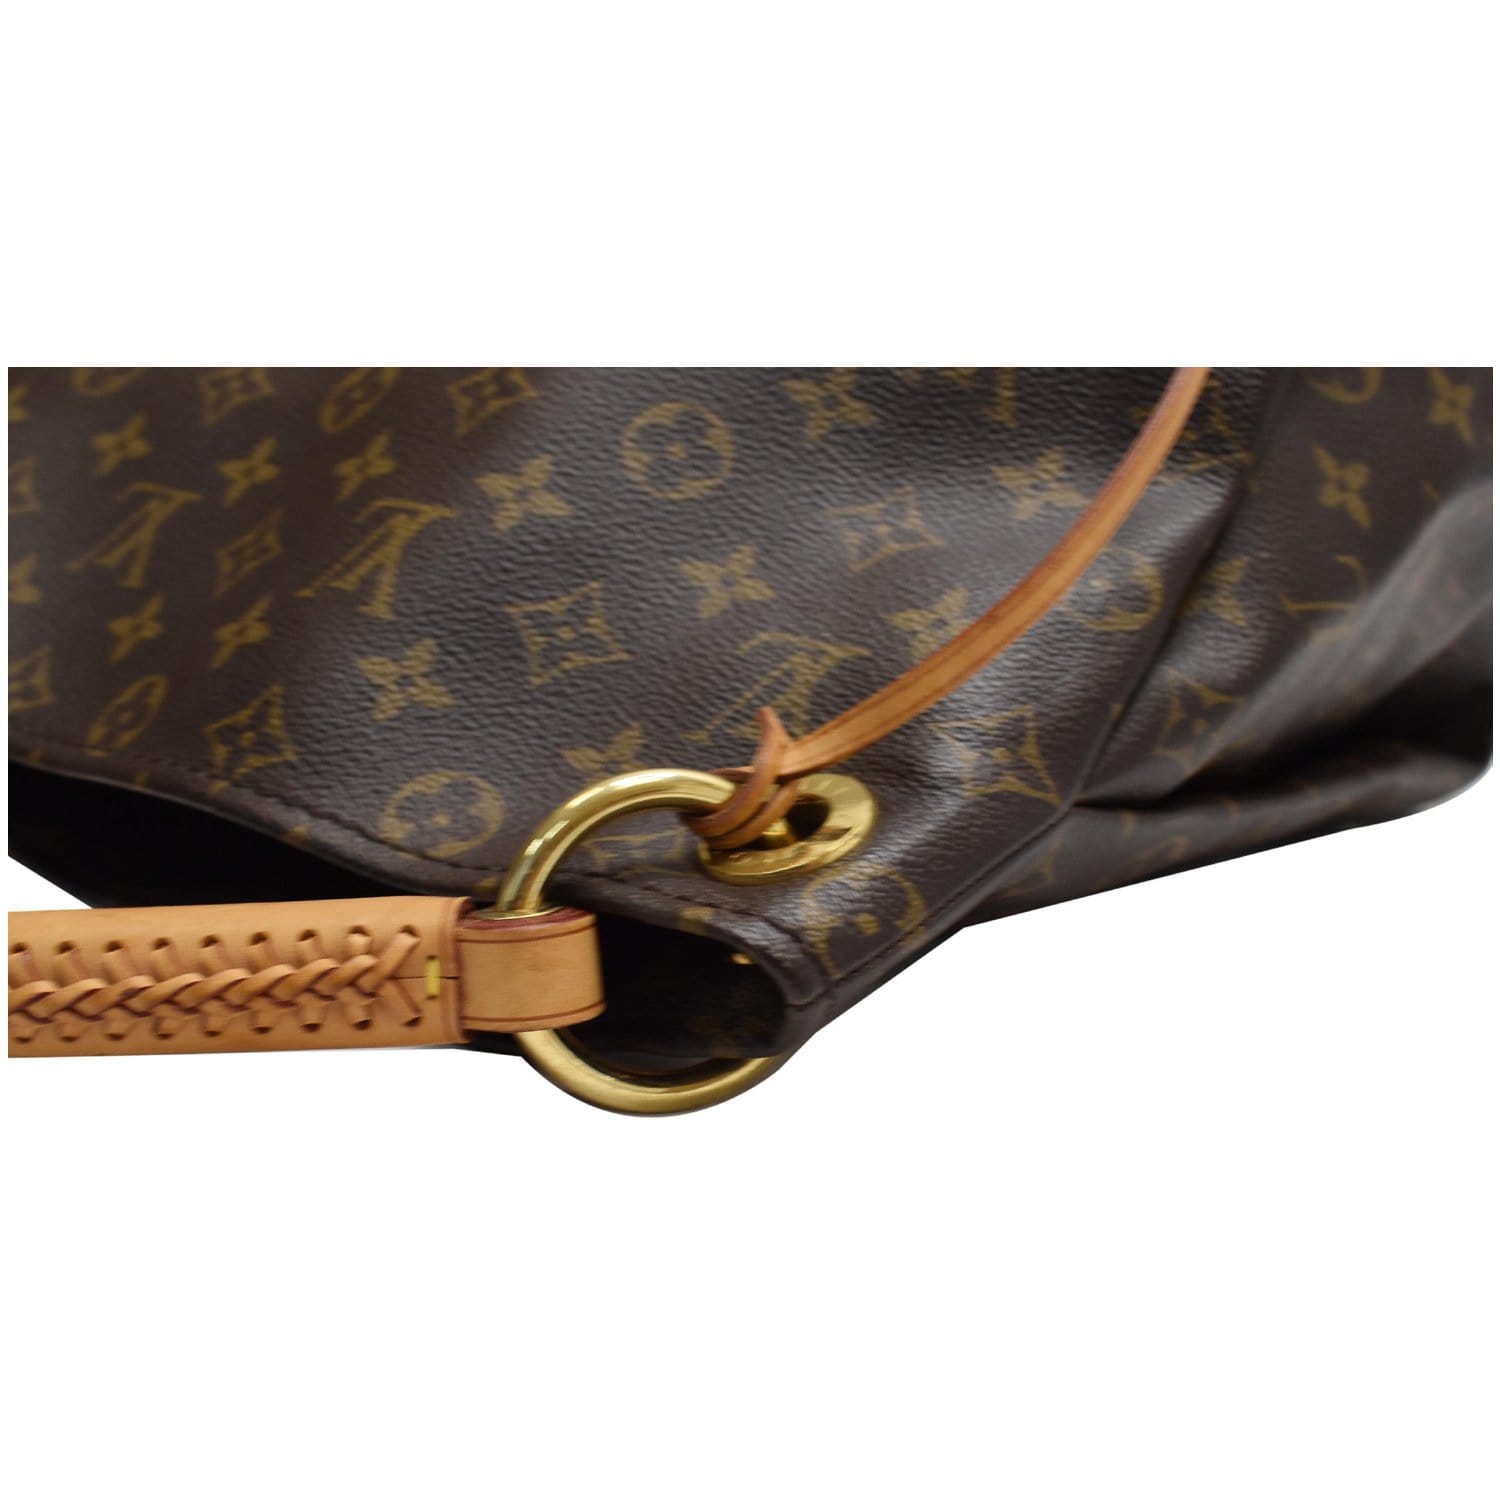 Liked New~LOUIS VUITTON Artsy Classic Brown Monogram MM Shoulder Bag